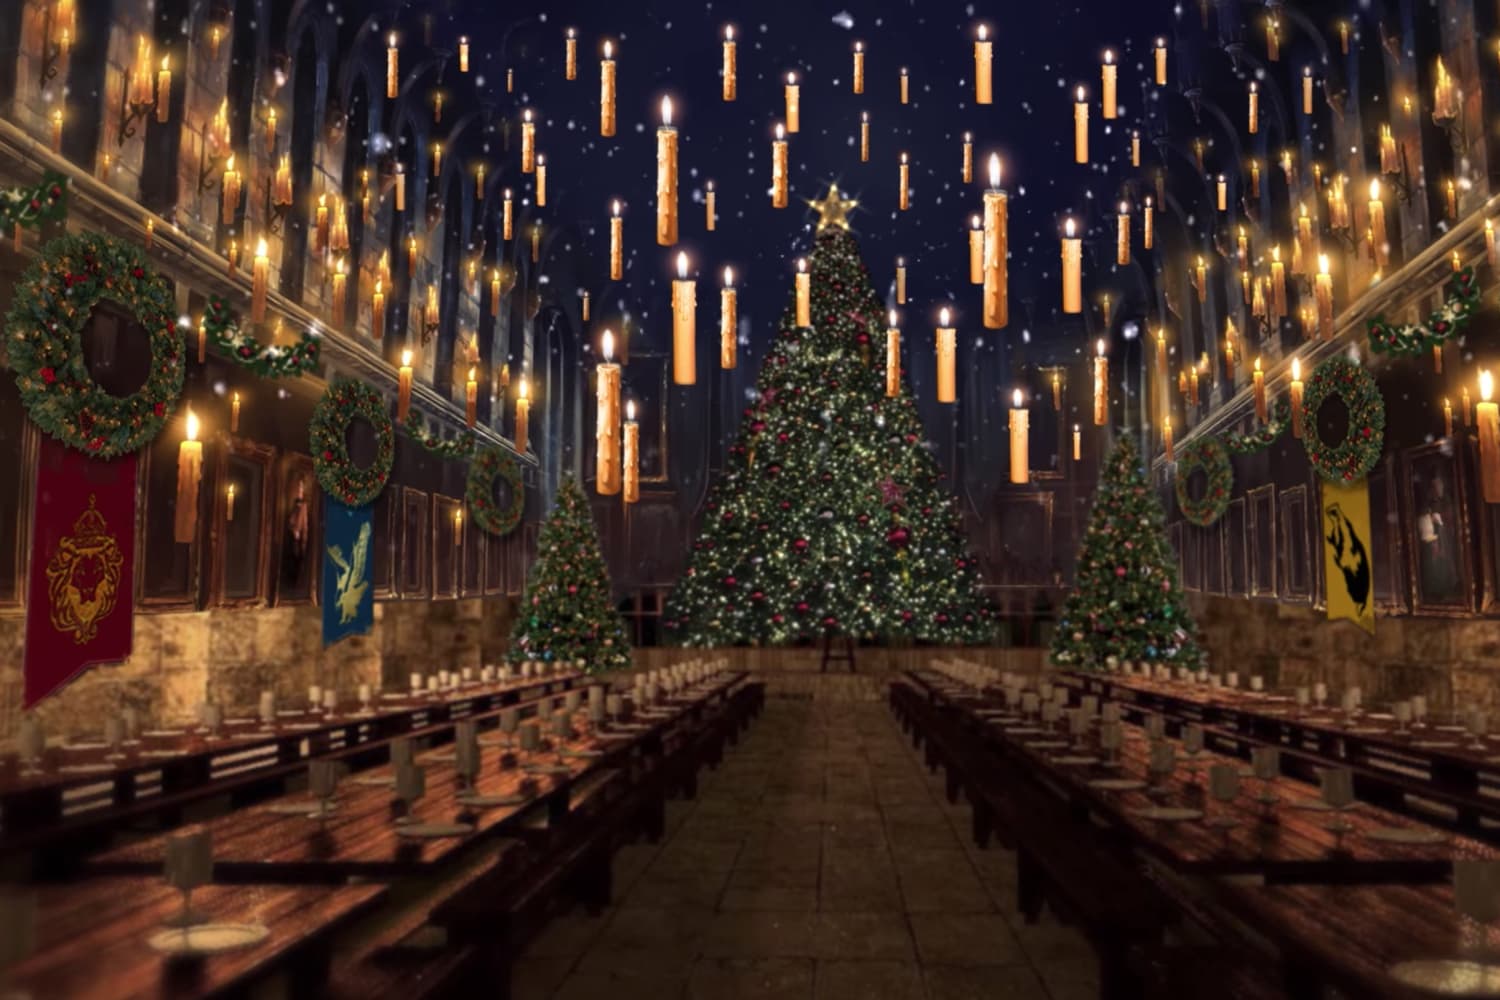 The Xmas Magic of Hogwarts Storms Throught PullCast